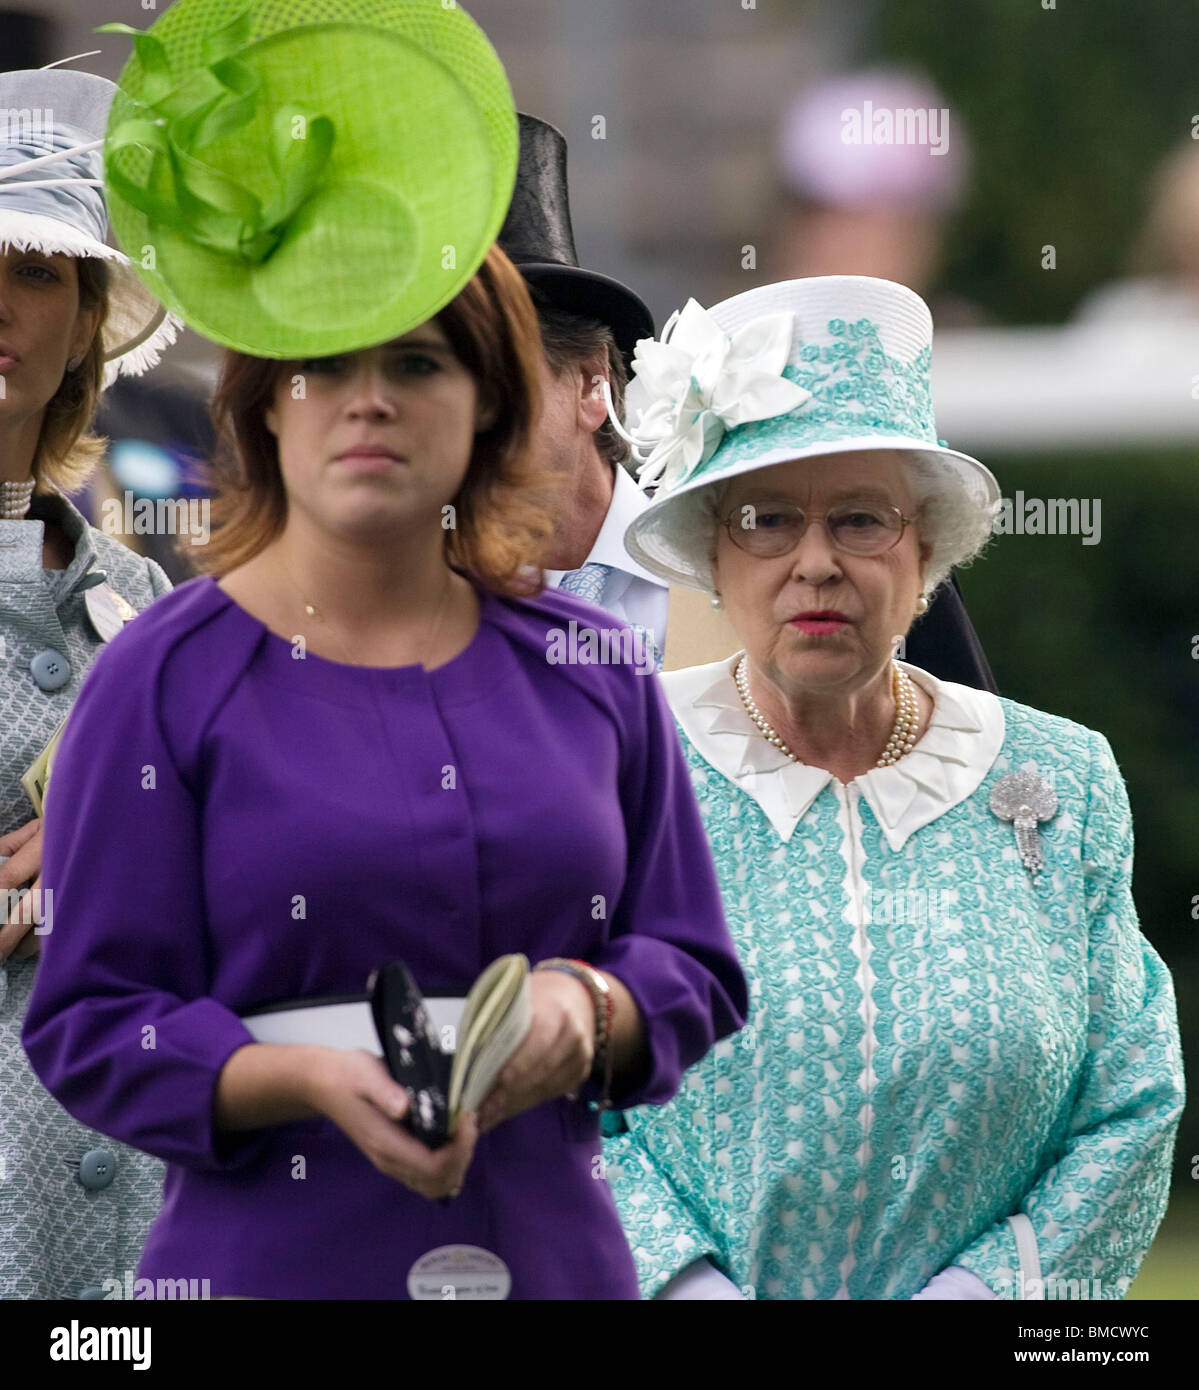 Britain's Queen Elizabeth II with granddaughter Princess Eugenie at Royal Ascot horse race meeting in 2009 Stock Photo